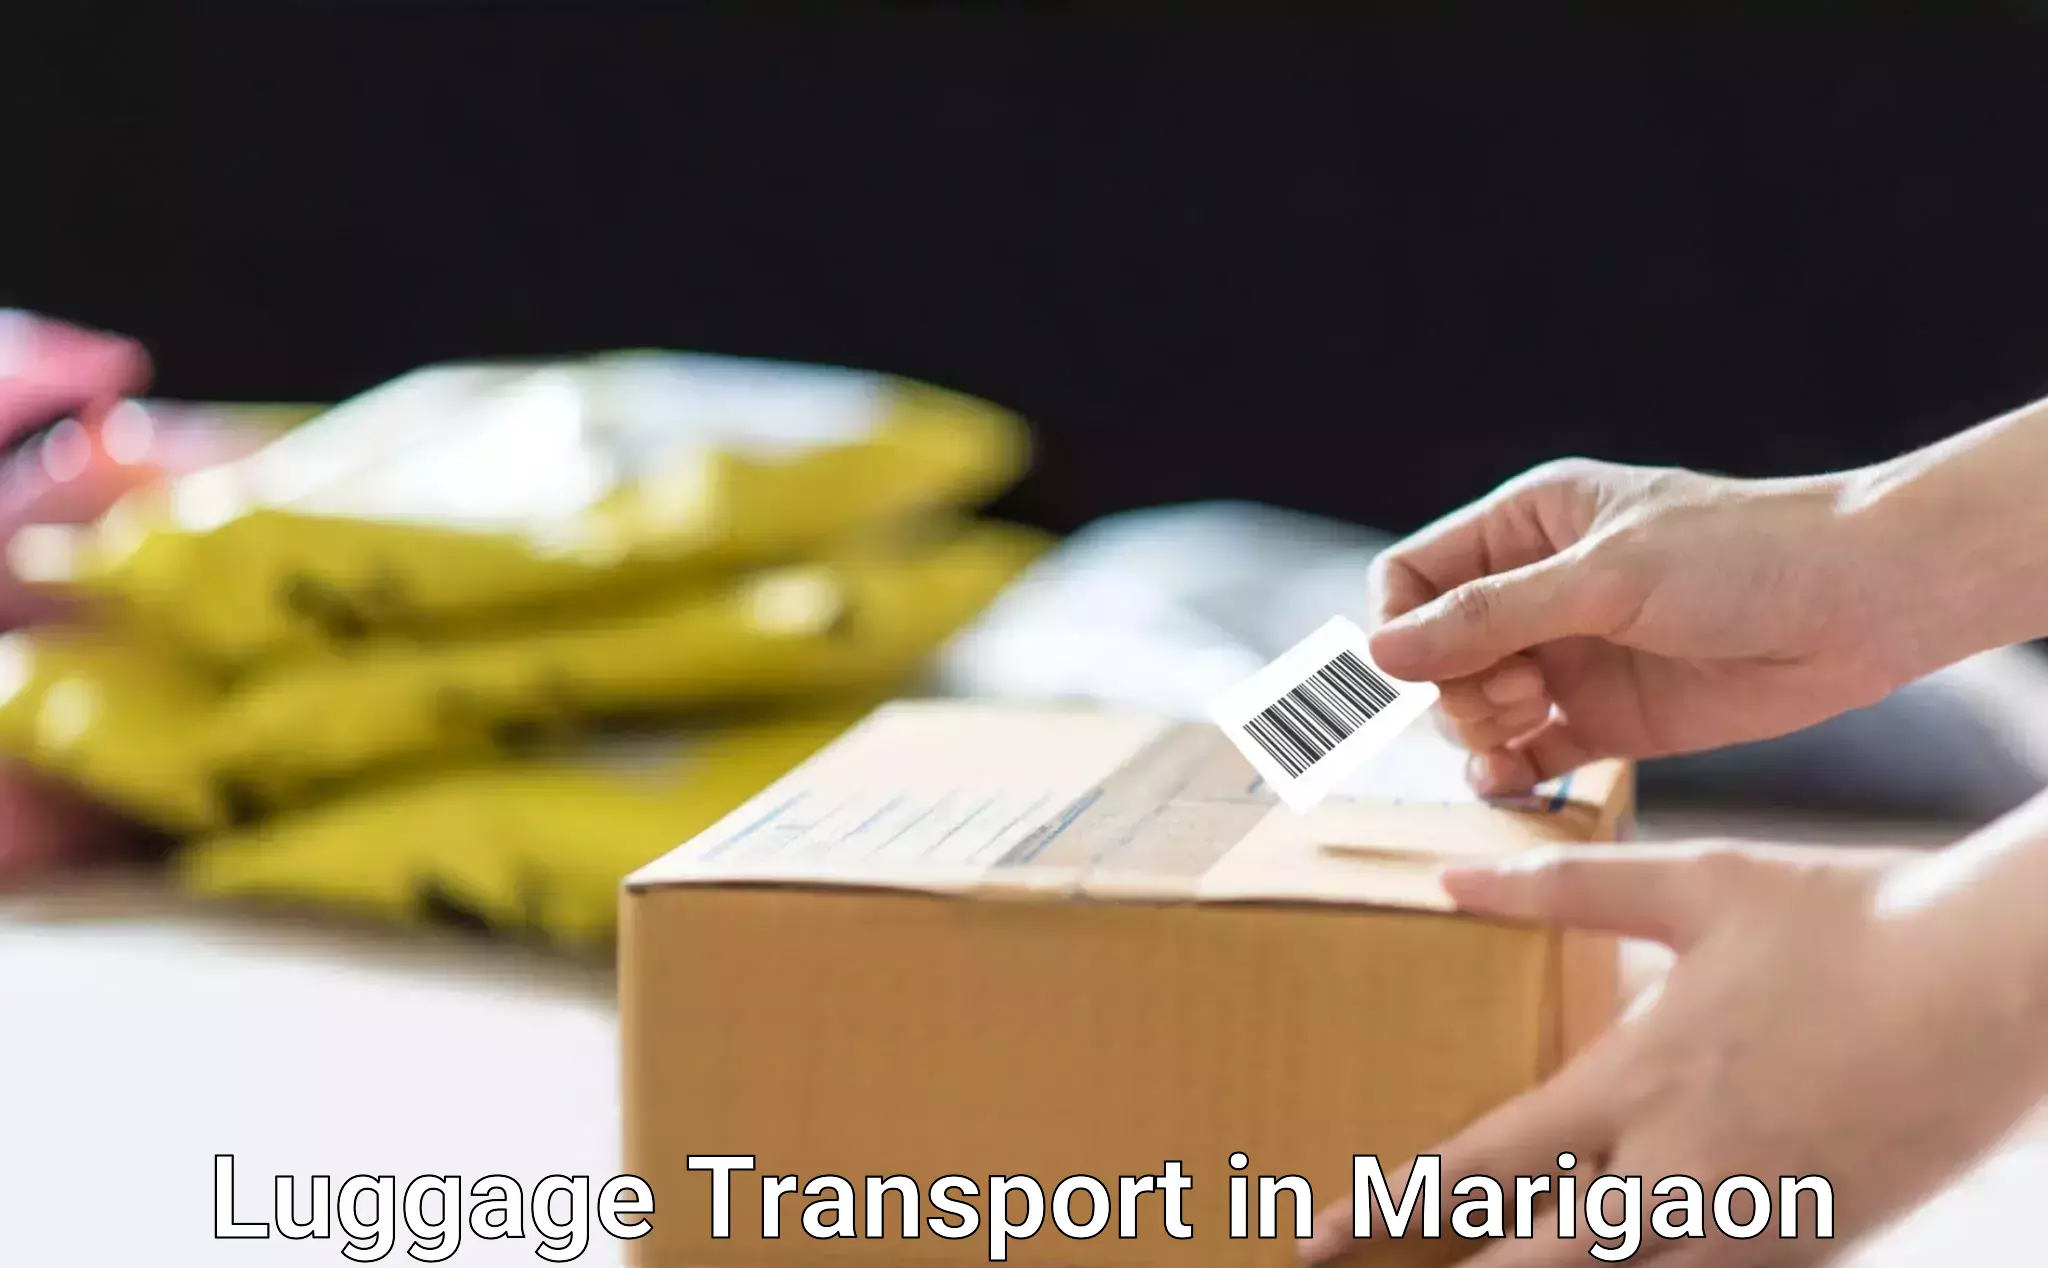 Luggage transport rates in Marigaon